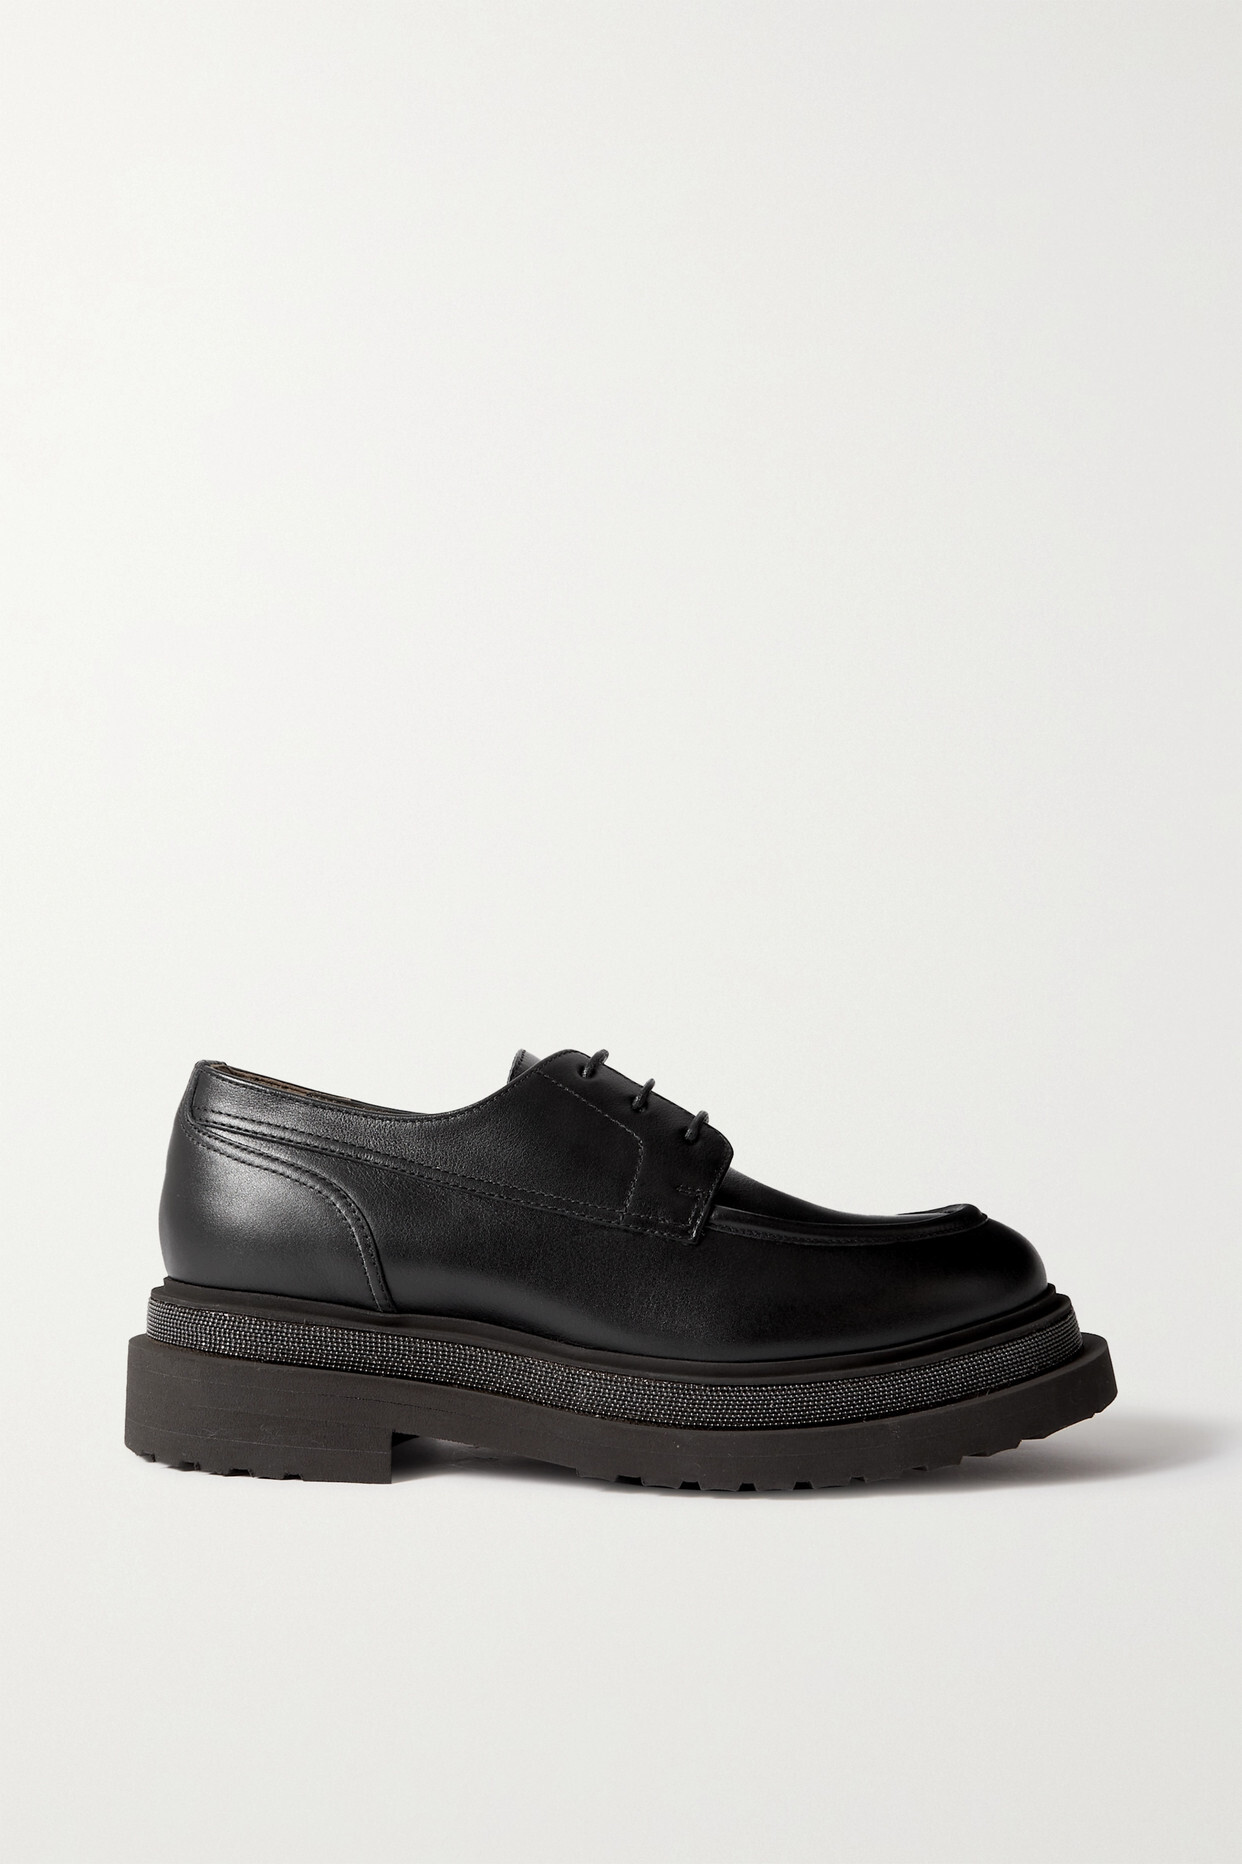 Brunello Cucinelli - Bead-embellished Leather Brogues - Black